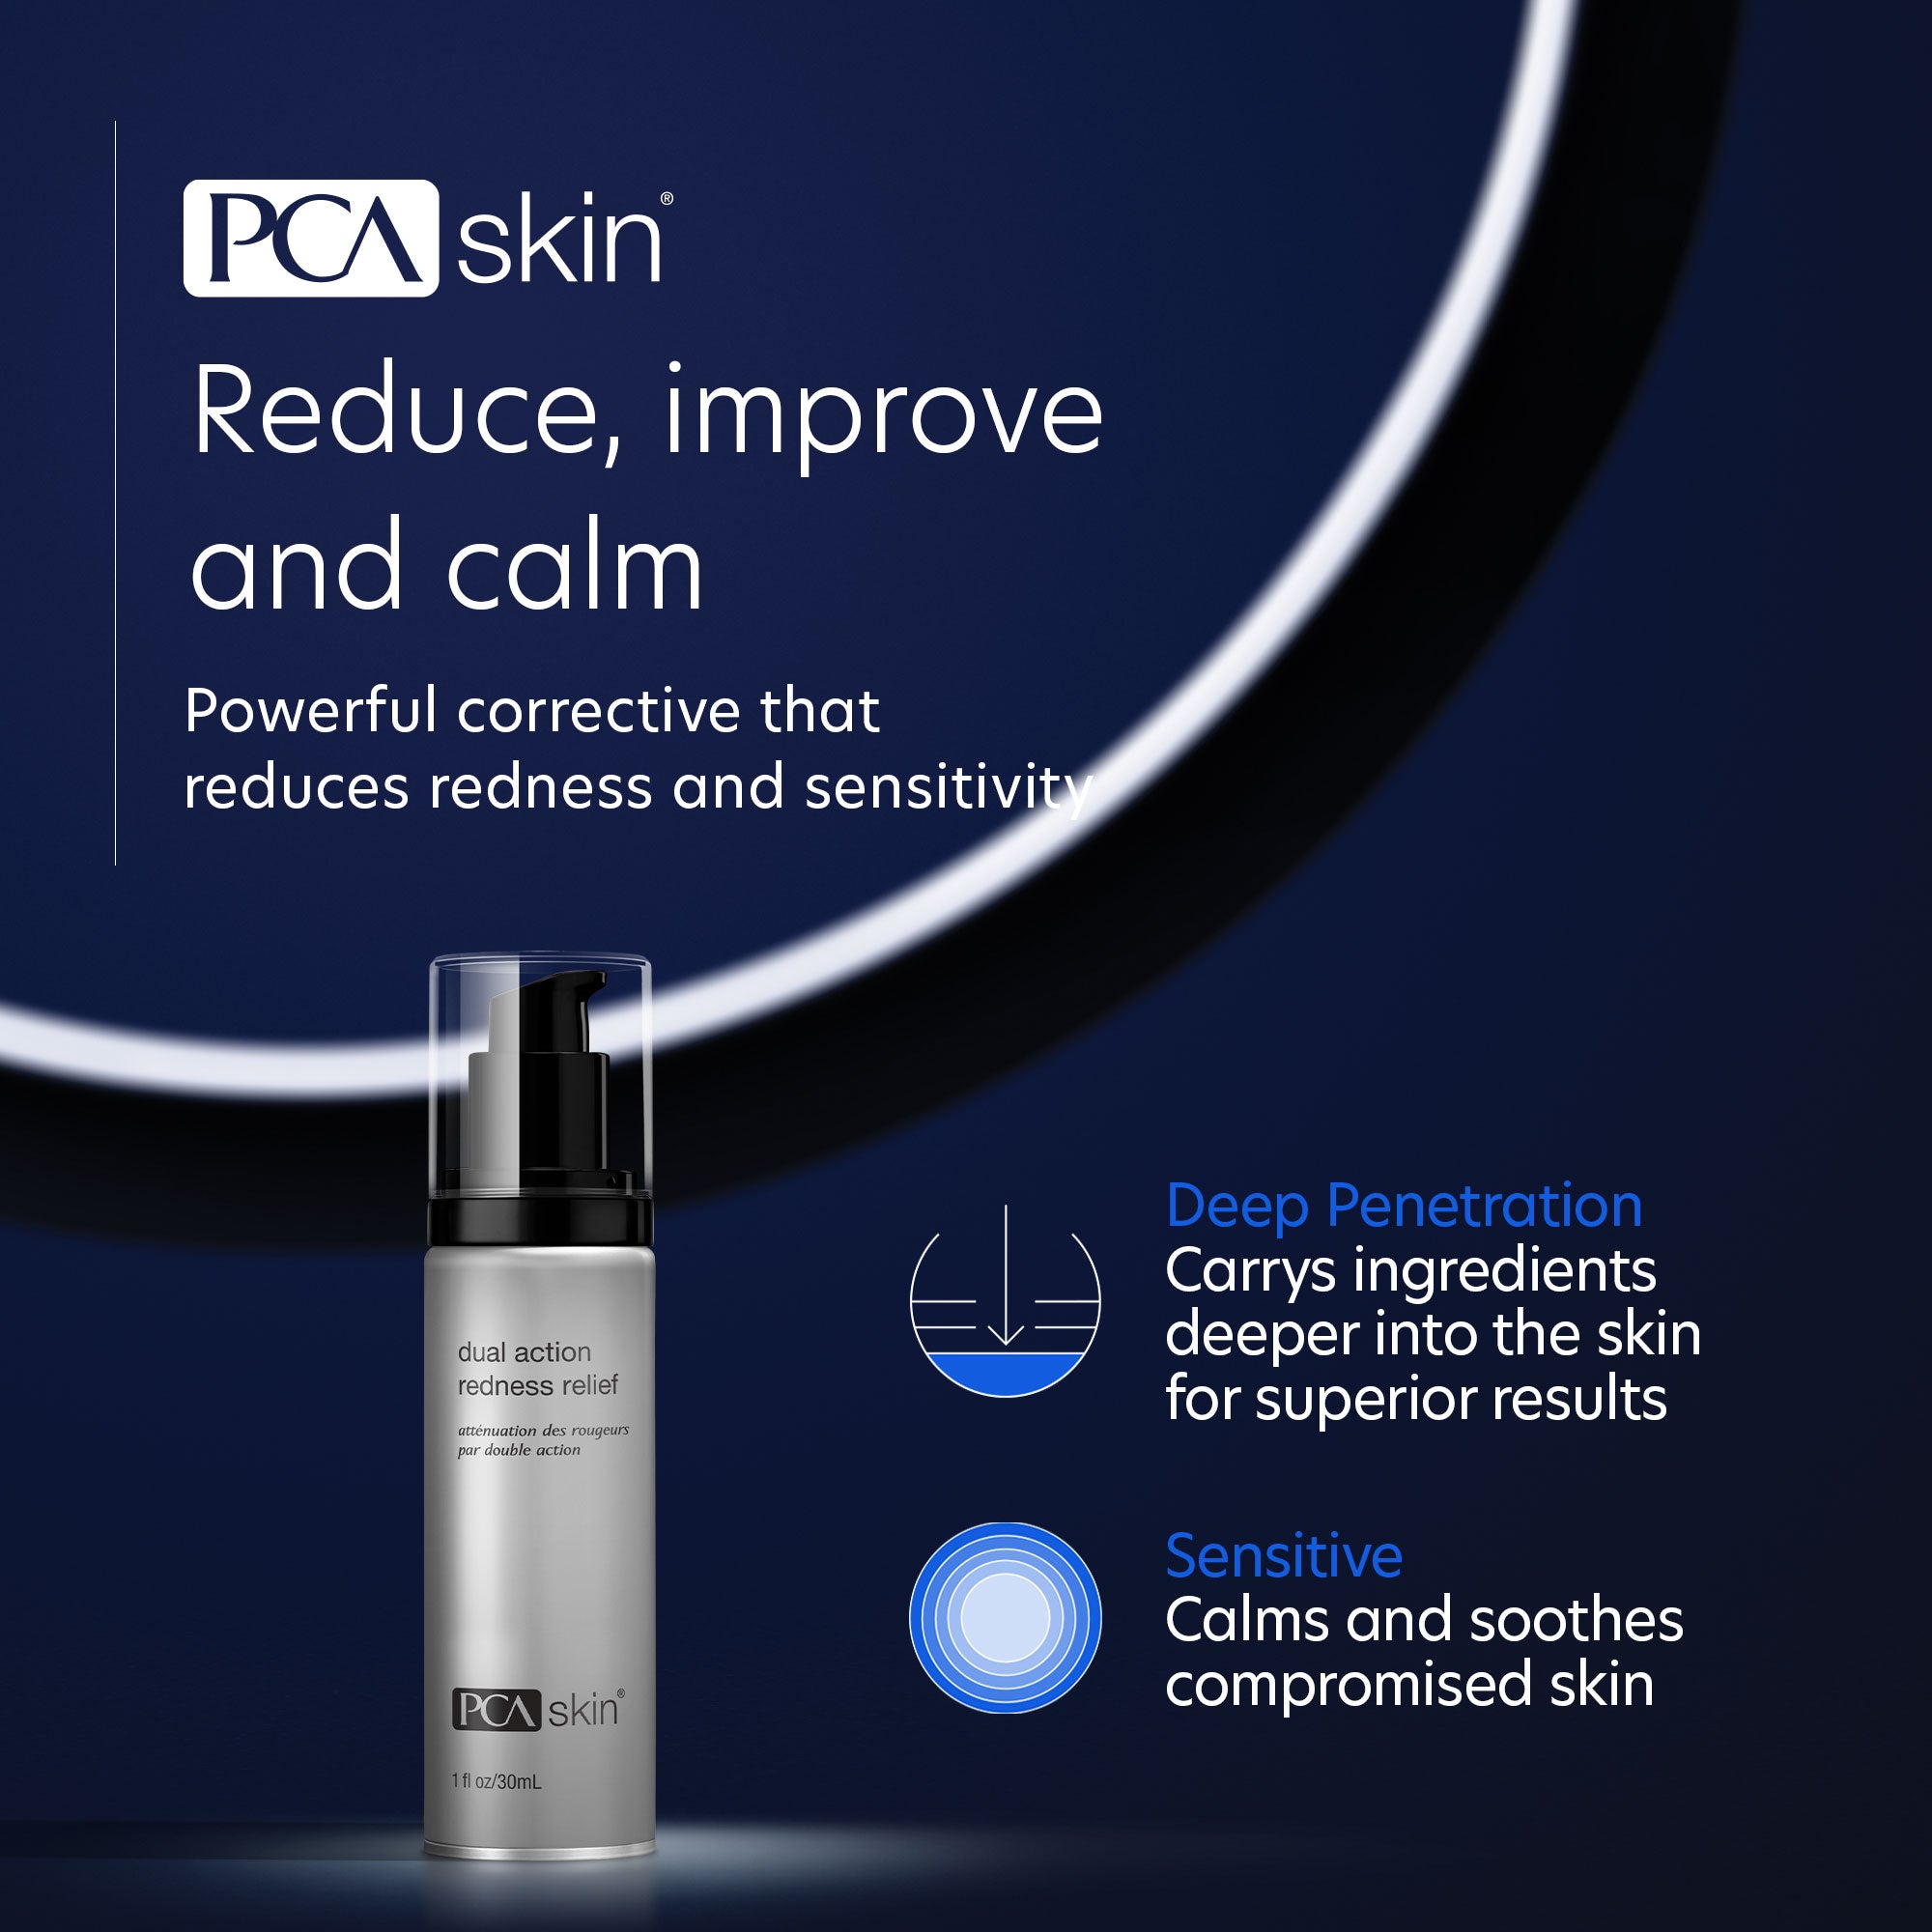 PCA Skin Dual Action Redness Relief (1 oz)